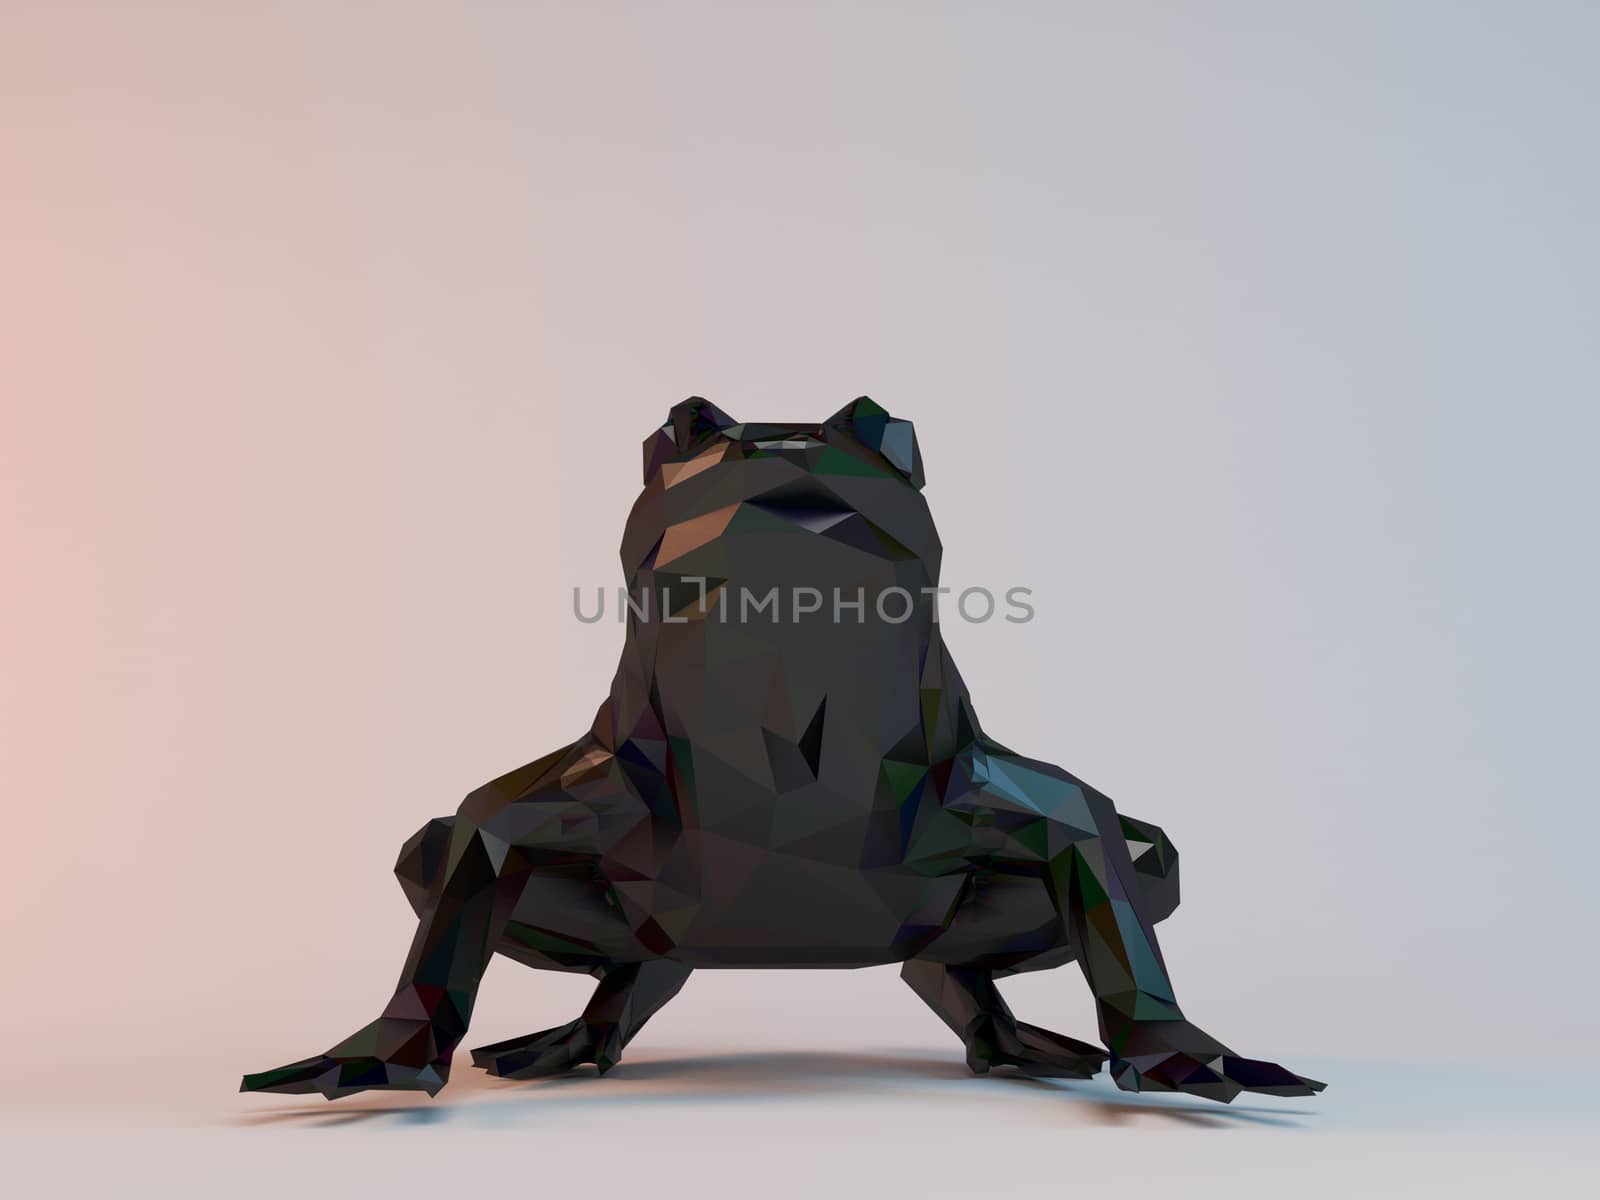 3D black low poly (frog) inside a white stage with high render quality to be used as a logo, medal, symbol, shape, emblem, icon, children story, or any other use.